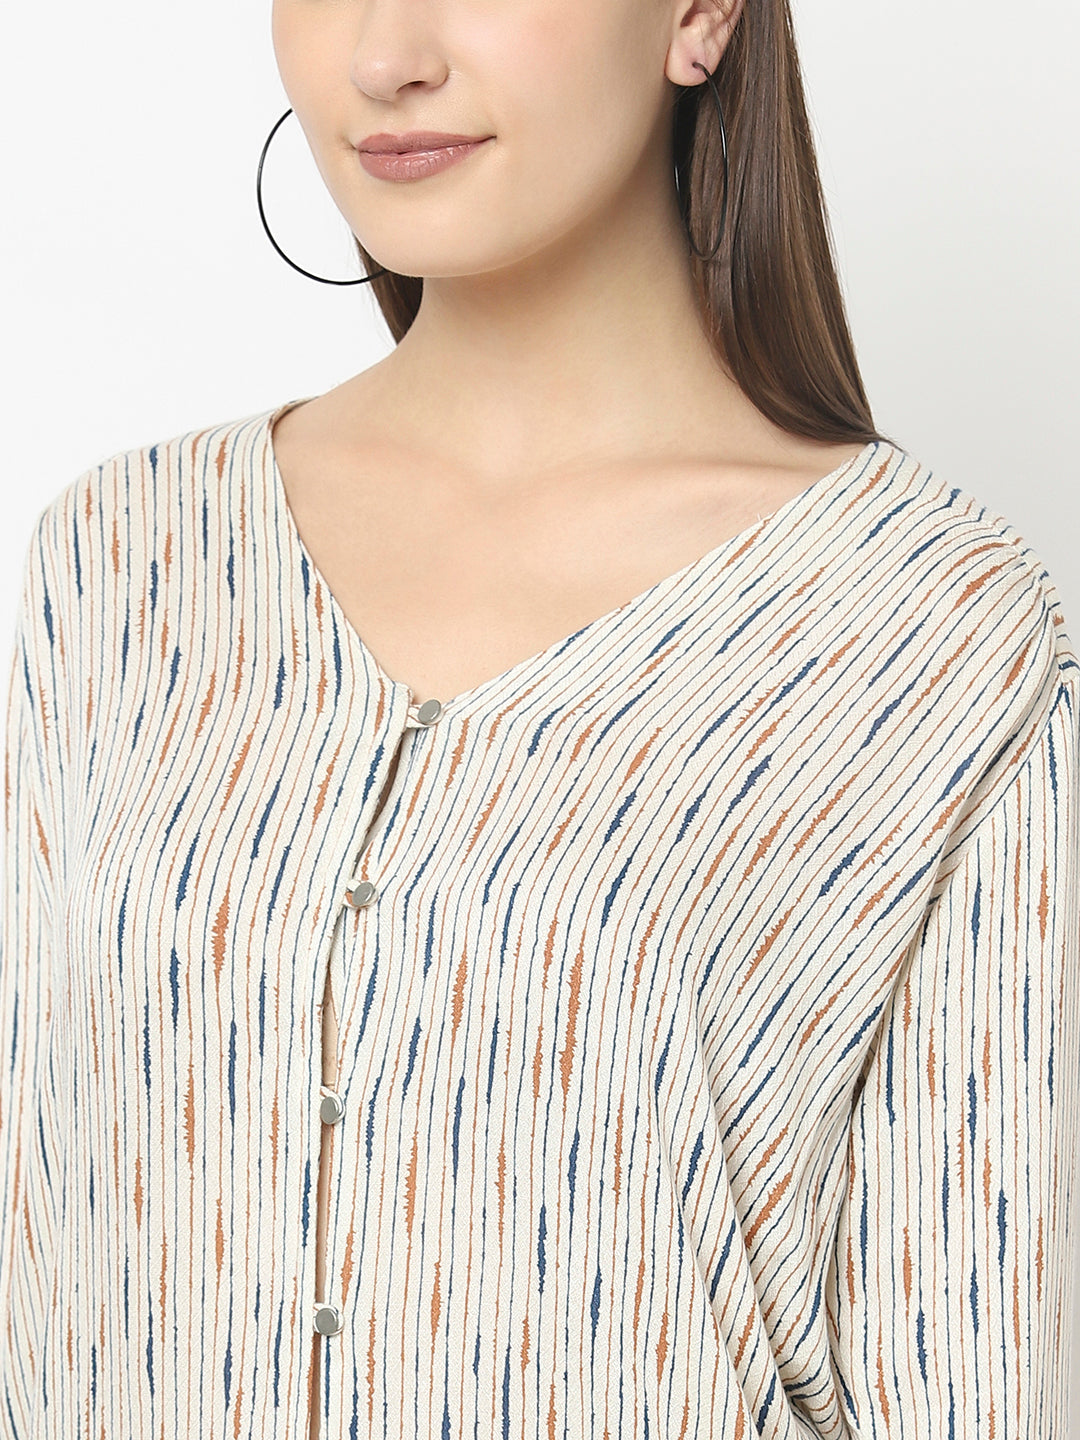 Teasing Peach Top in Abstract Print